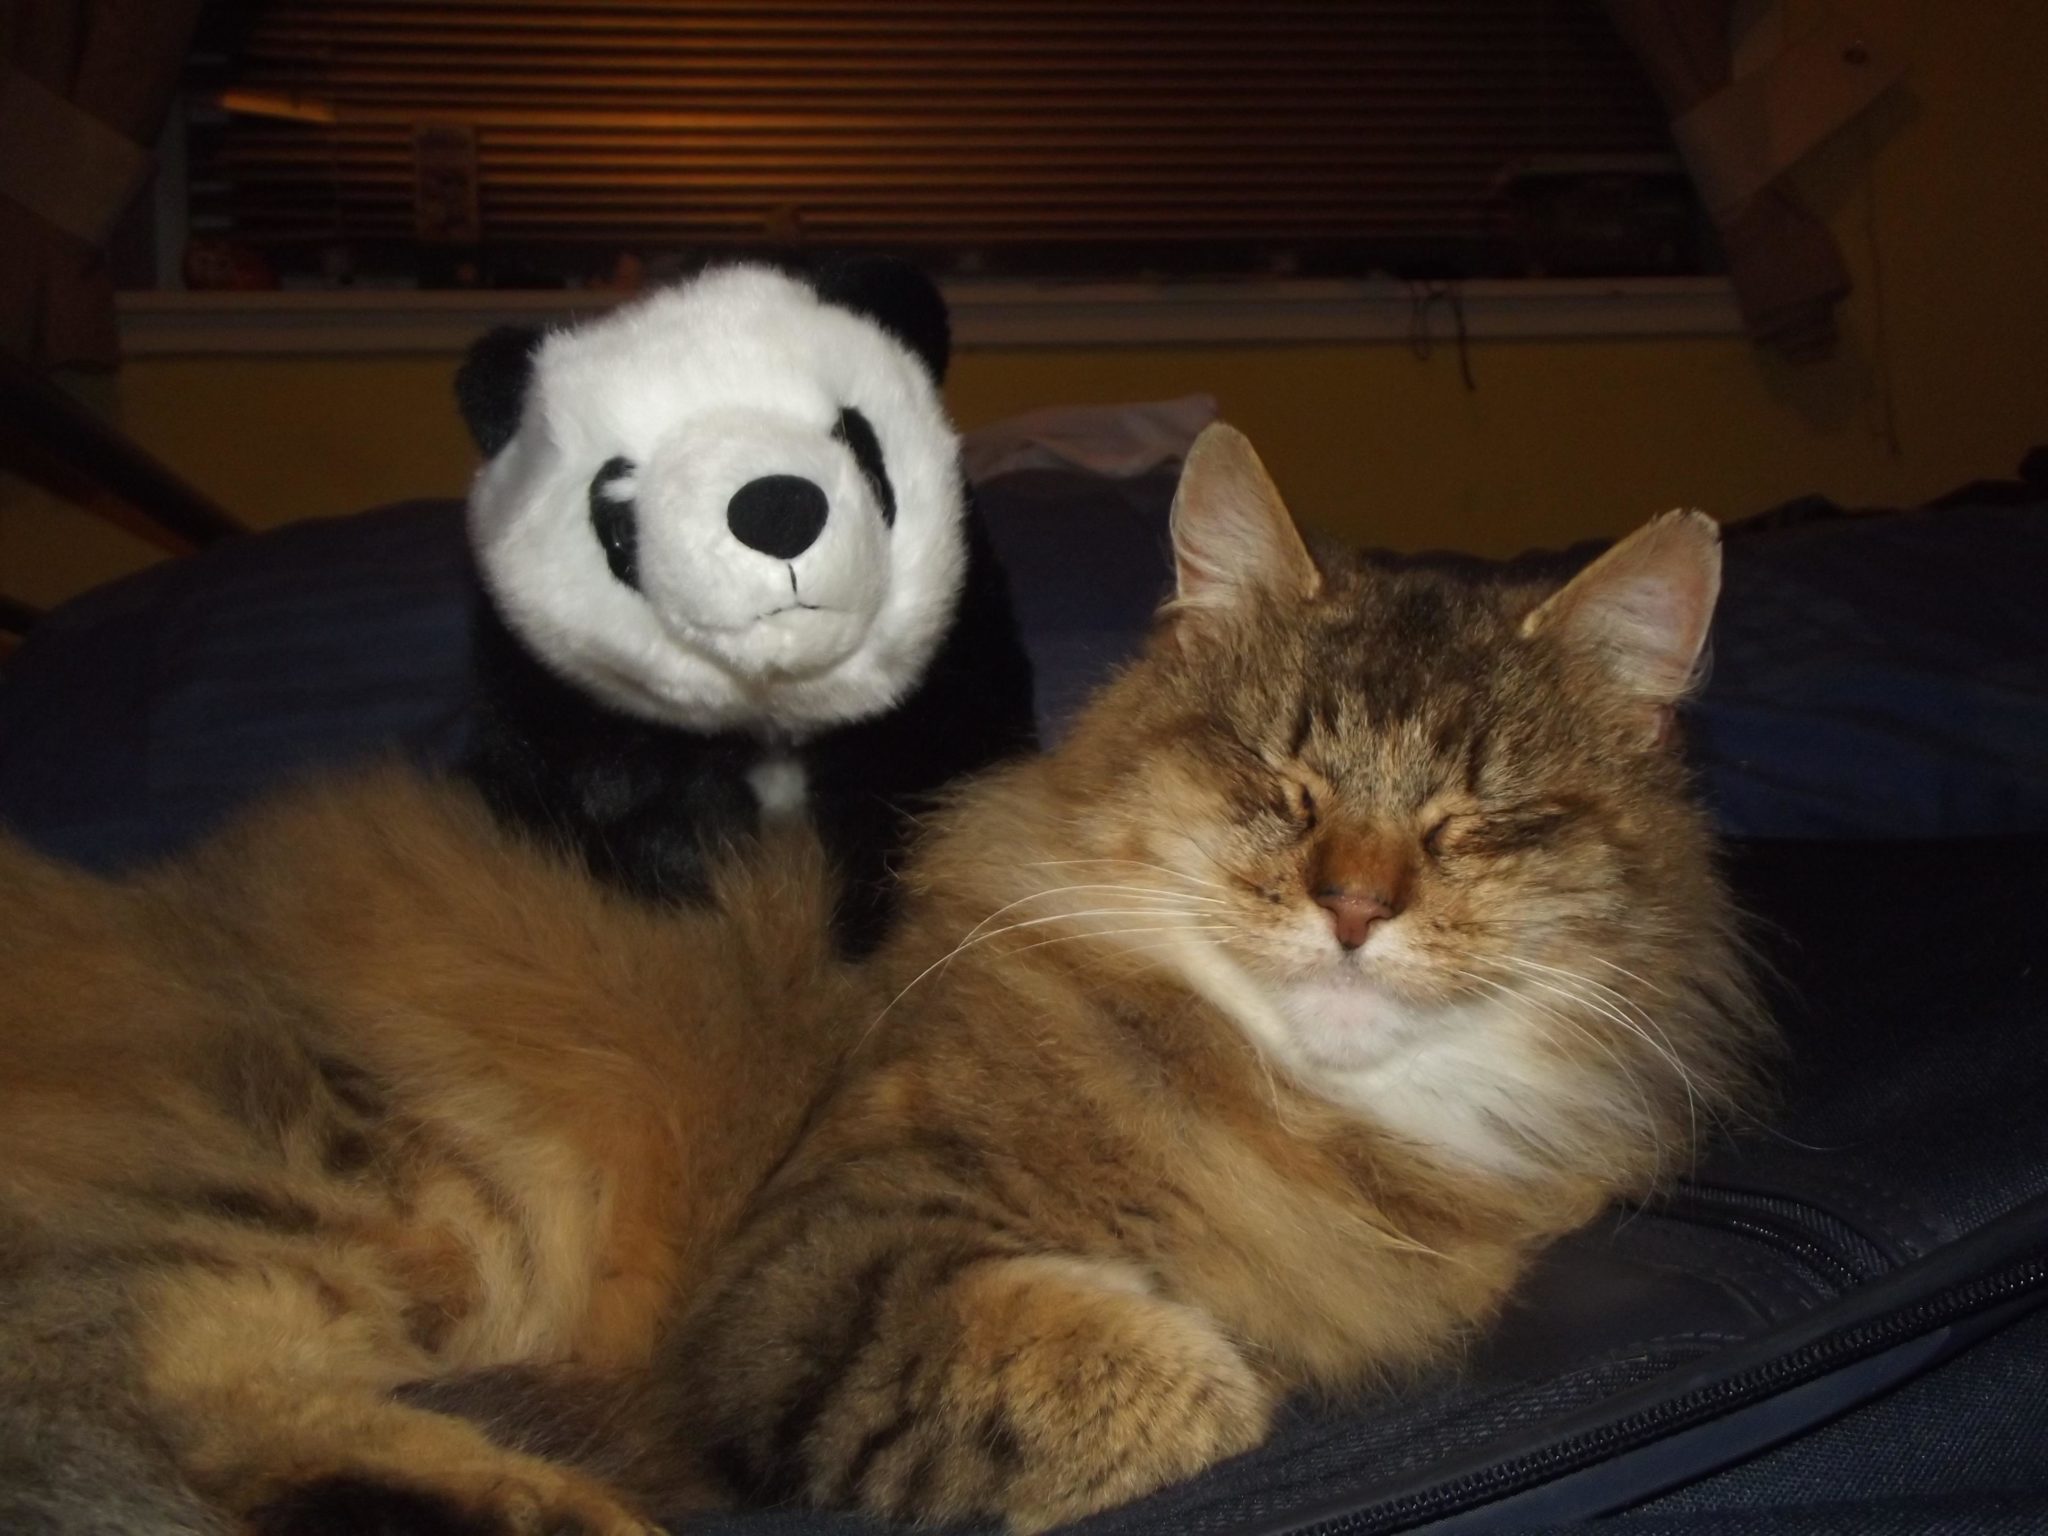 Star, the cat! Happily resting with her Panda friend